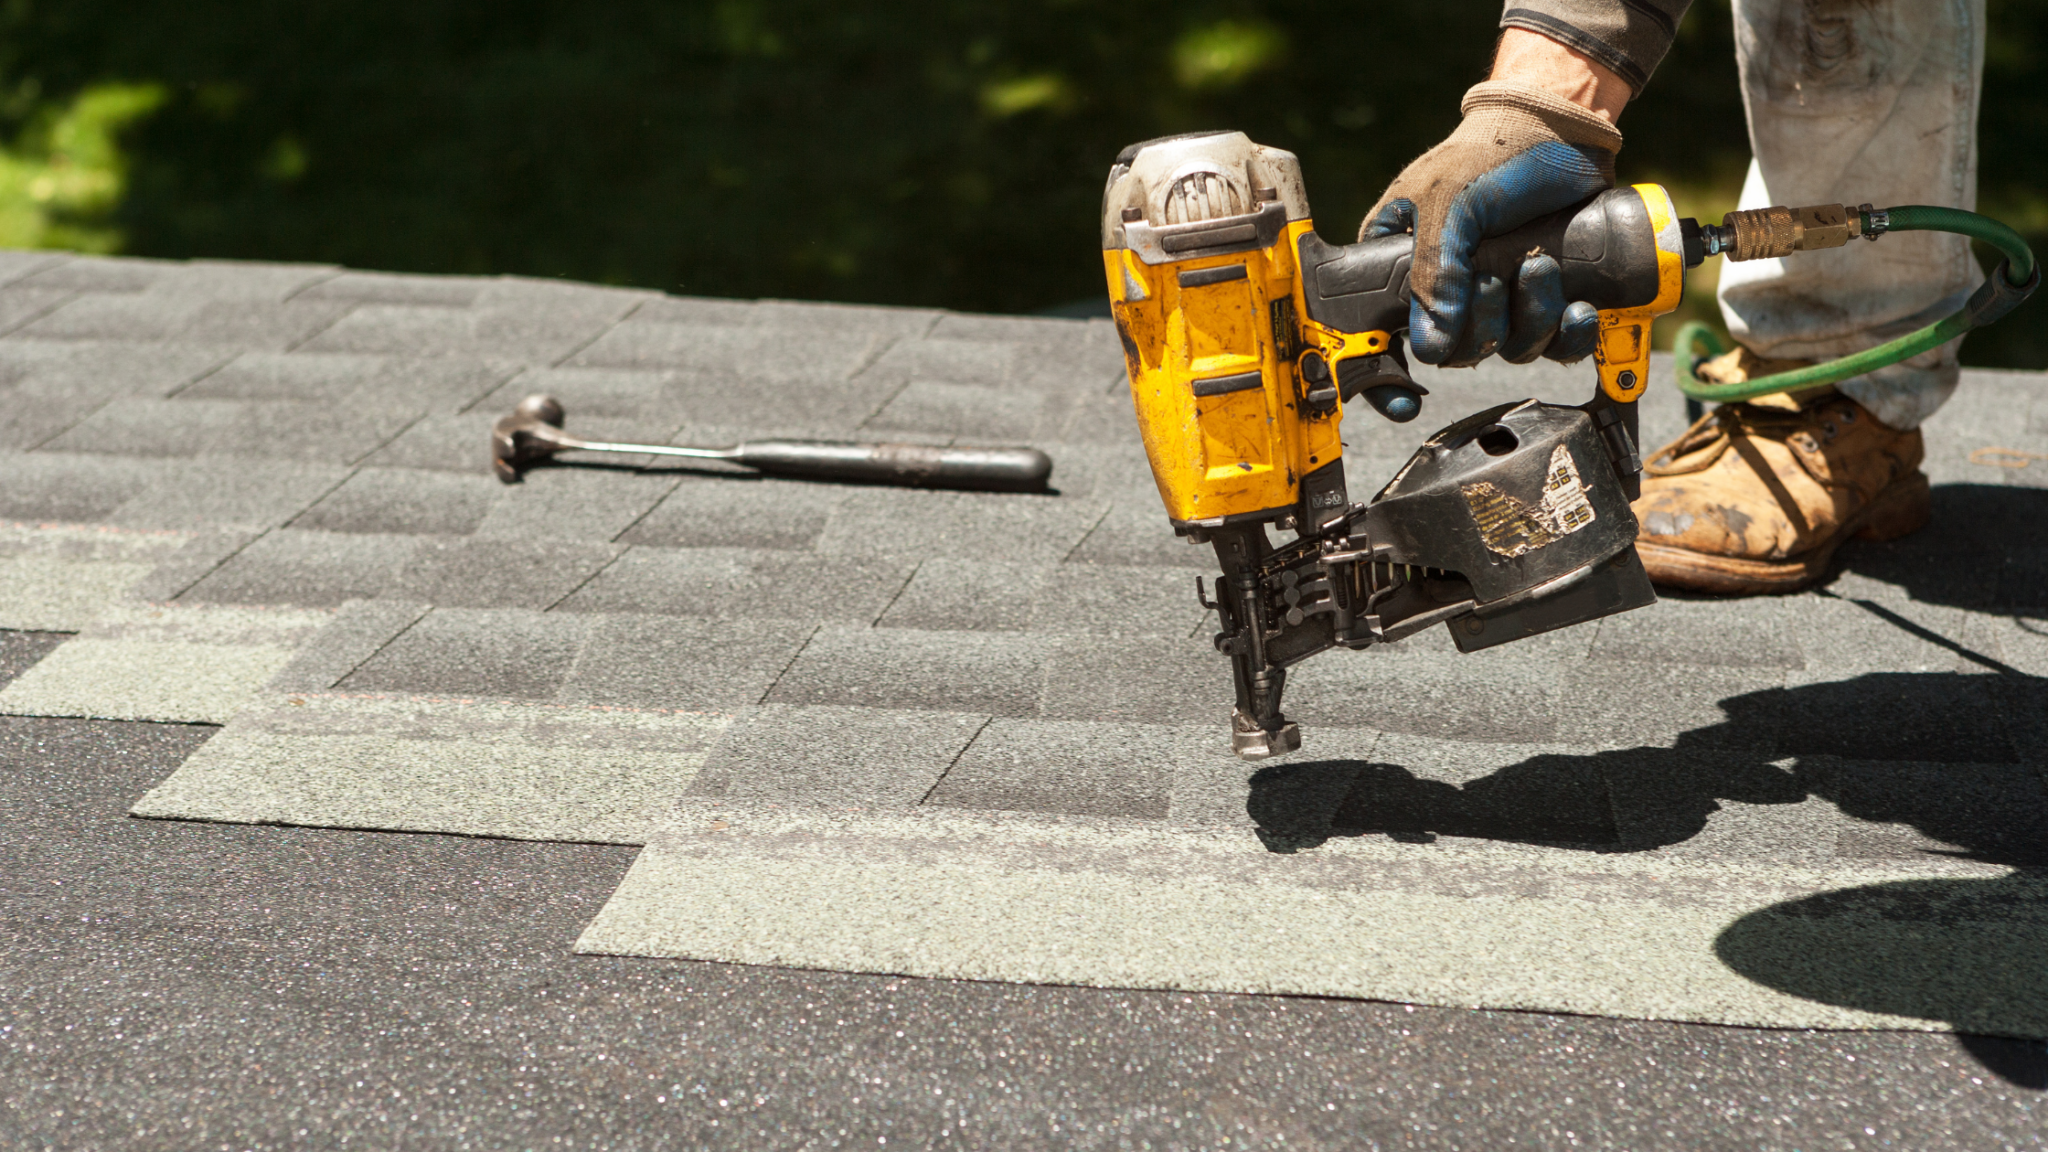 DIY Roof Replacement vs. Professional Roofing